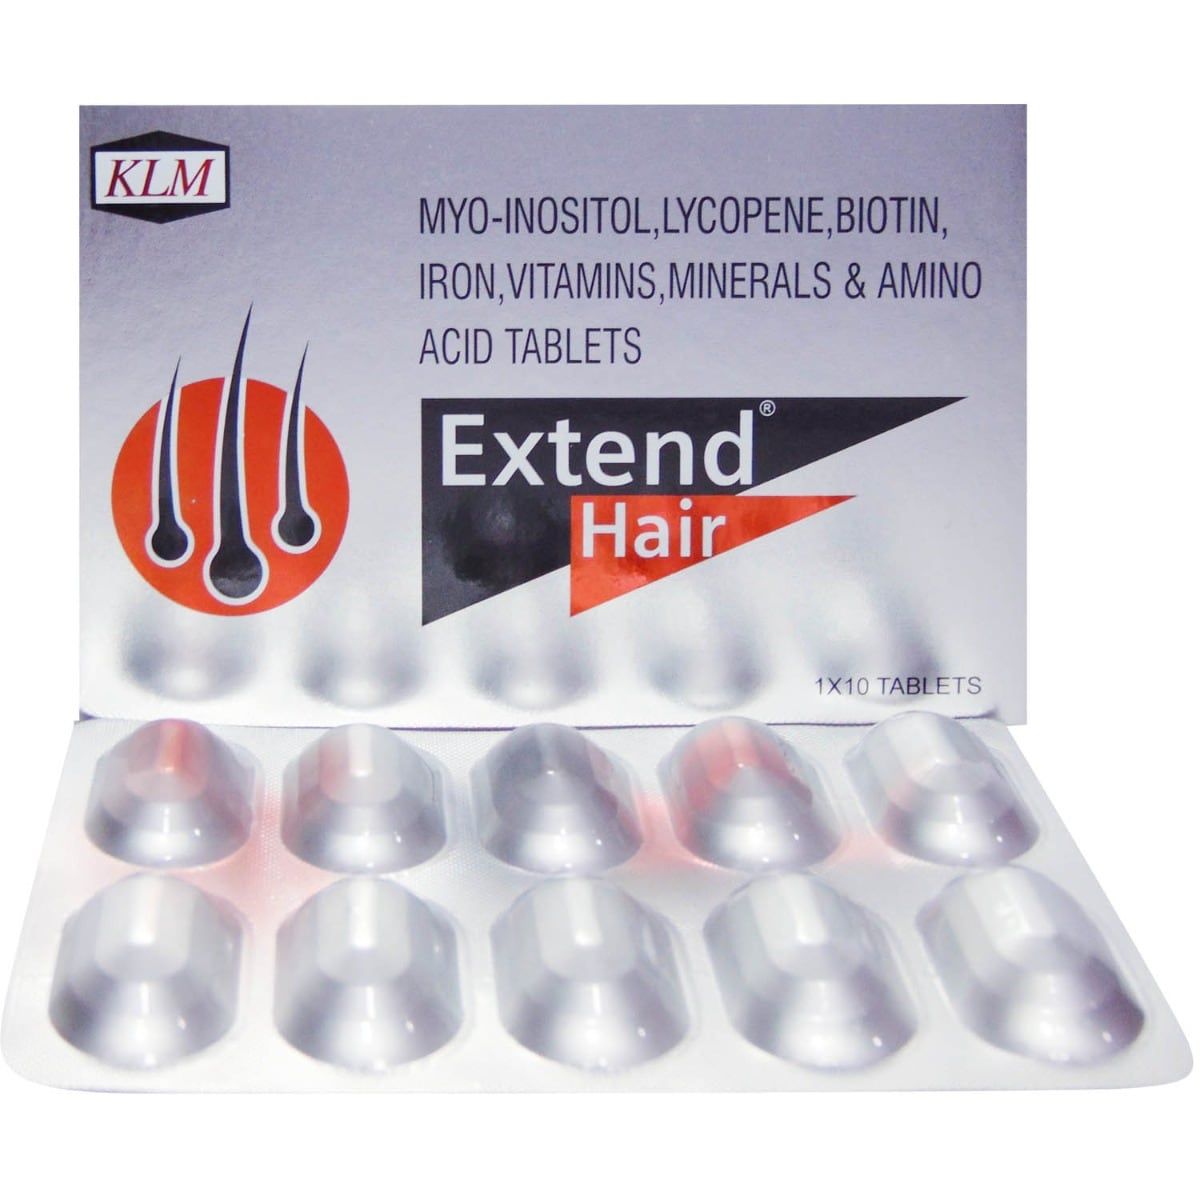 Extend Hair Tablet 10's Price, Uses, Side Effects, Composition - Apollo  Pharmacy